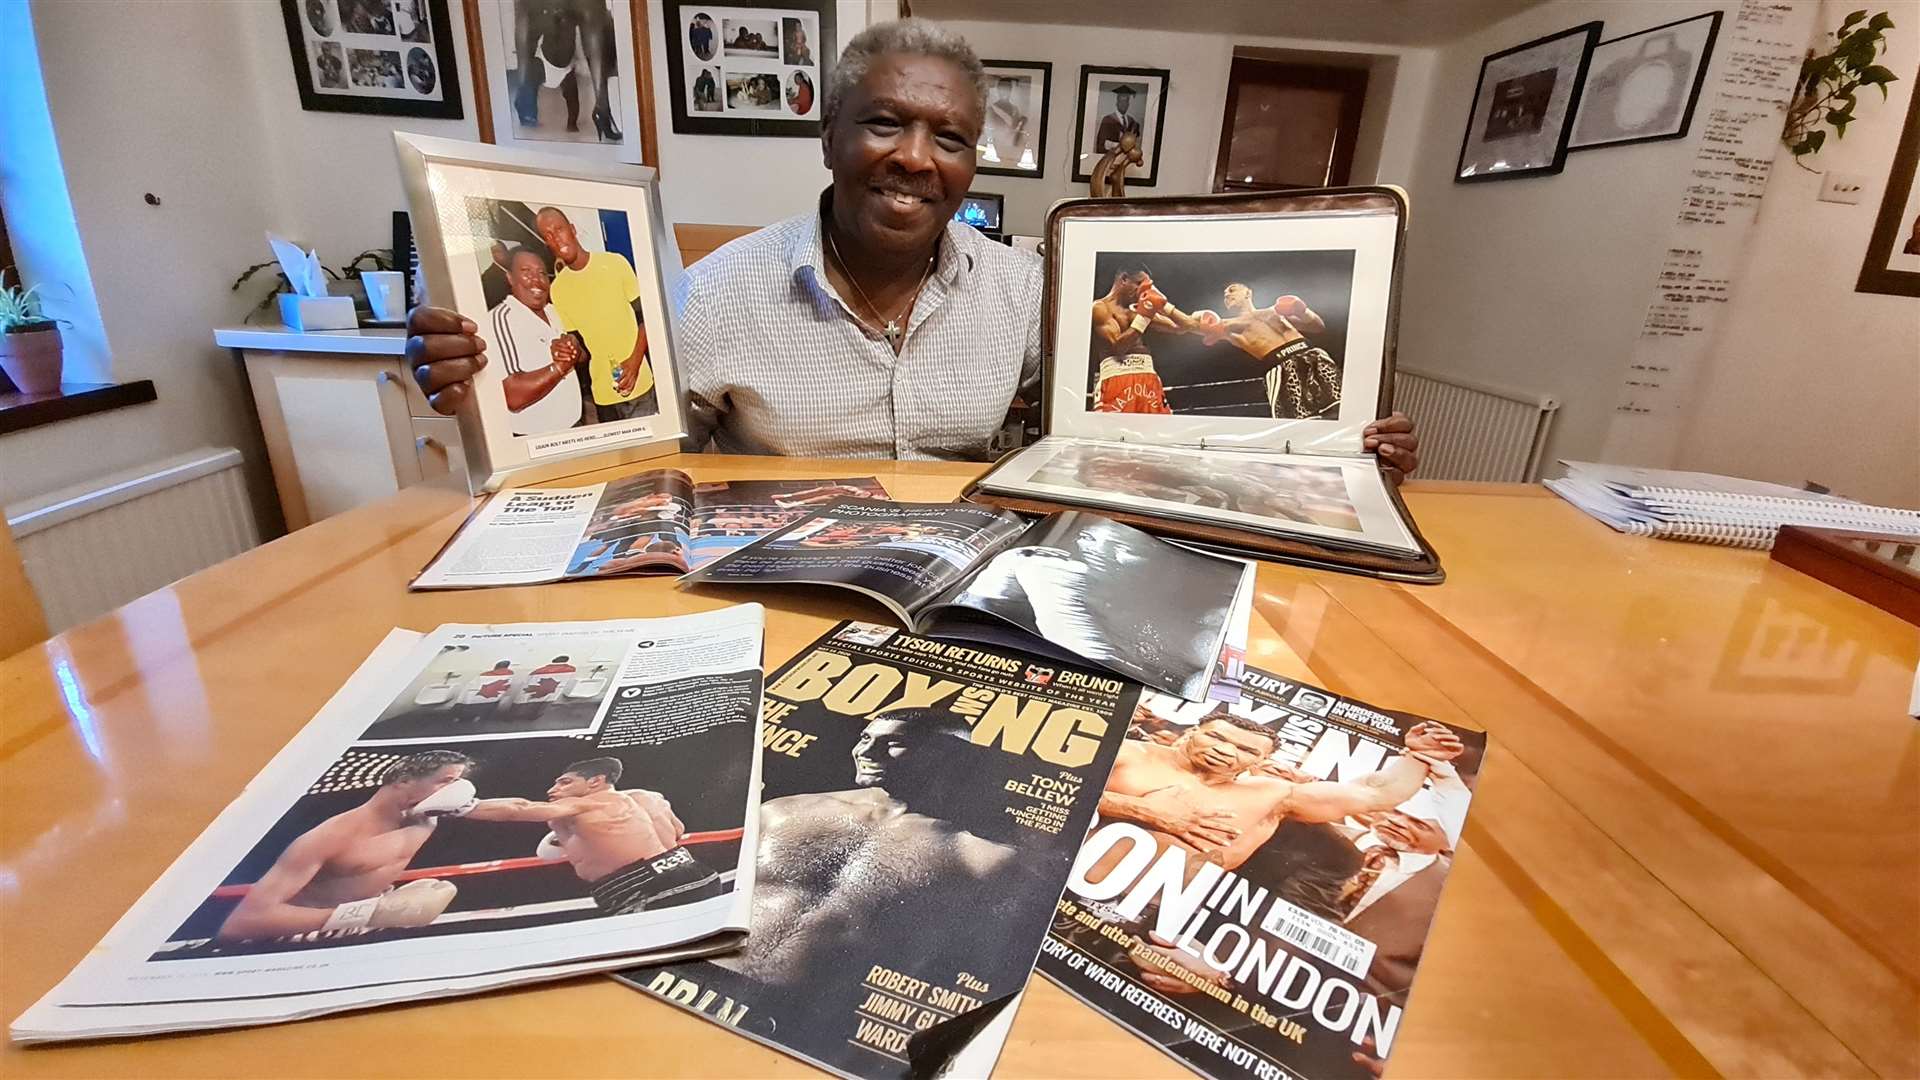 John Gichigi at home with just a fraction of his work